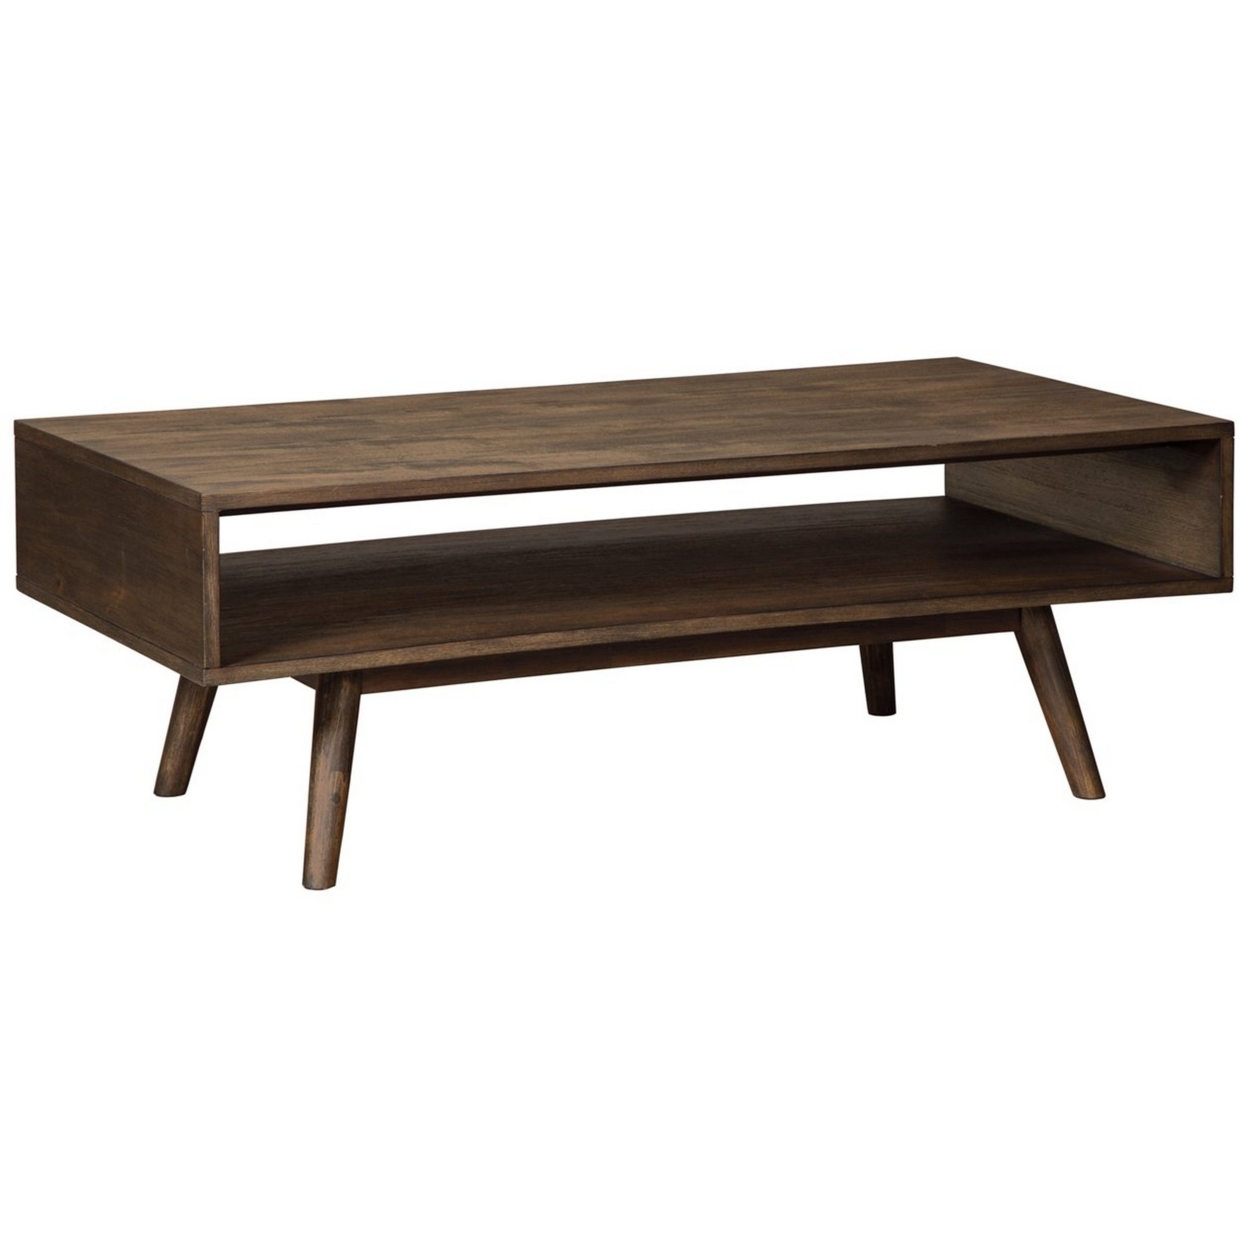 Wooden Cocktail Table With Open Bottom Shelf And Angled Legs, Brown- Saltoro Sherpi